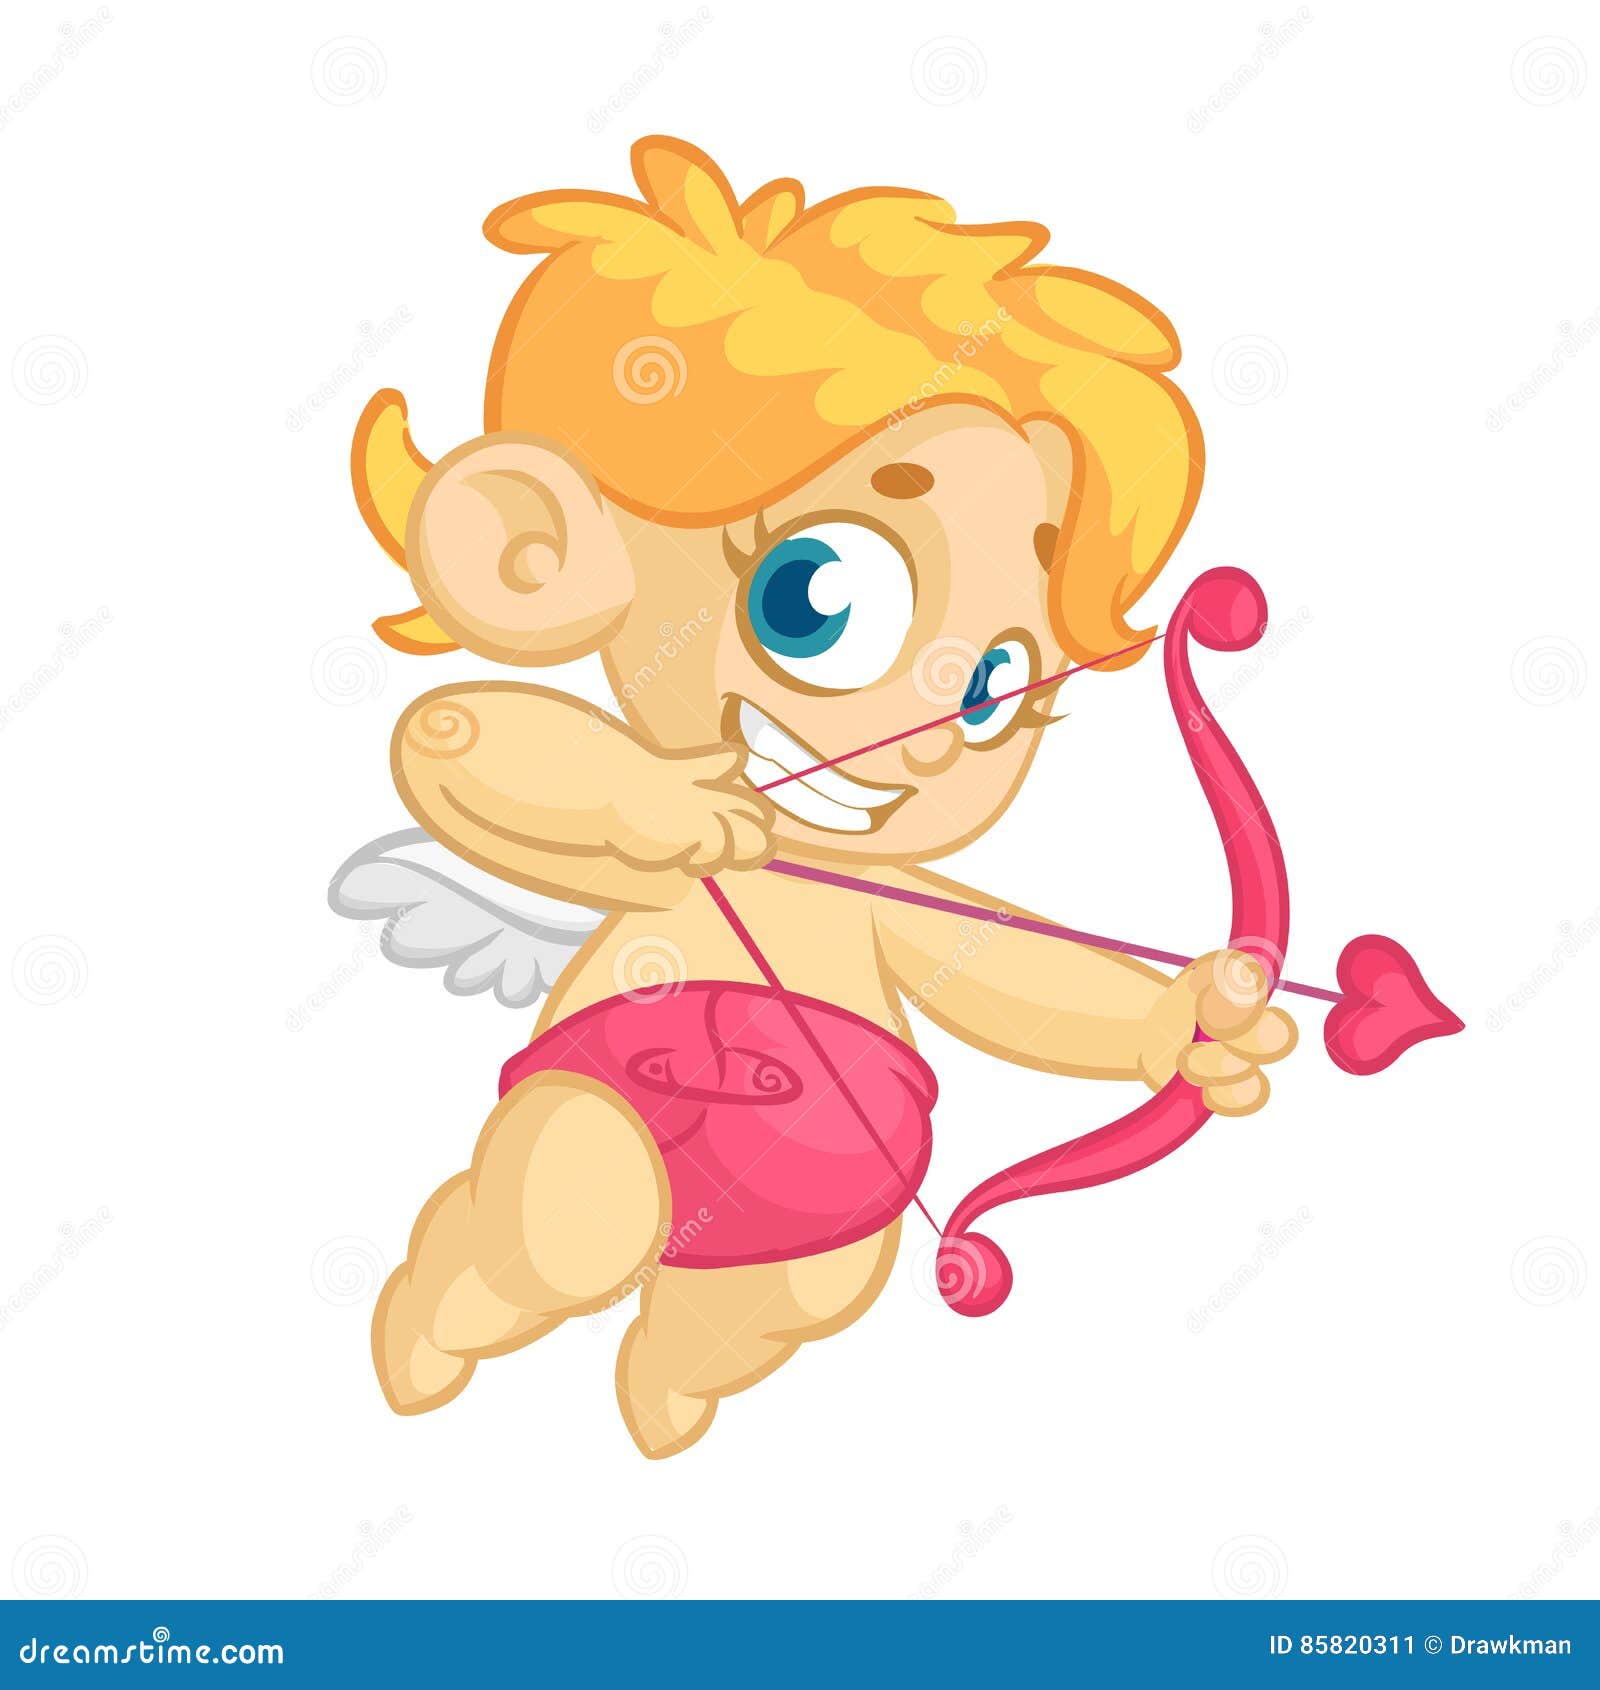 Poster With Funny Cupid Cartoon Character With Bow And Arrow Vector Illustration For Valentine